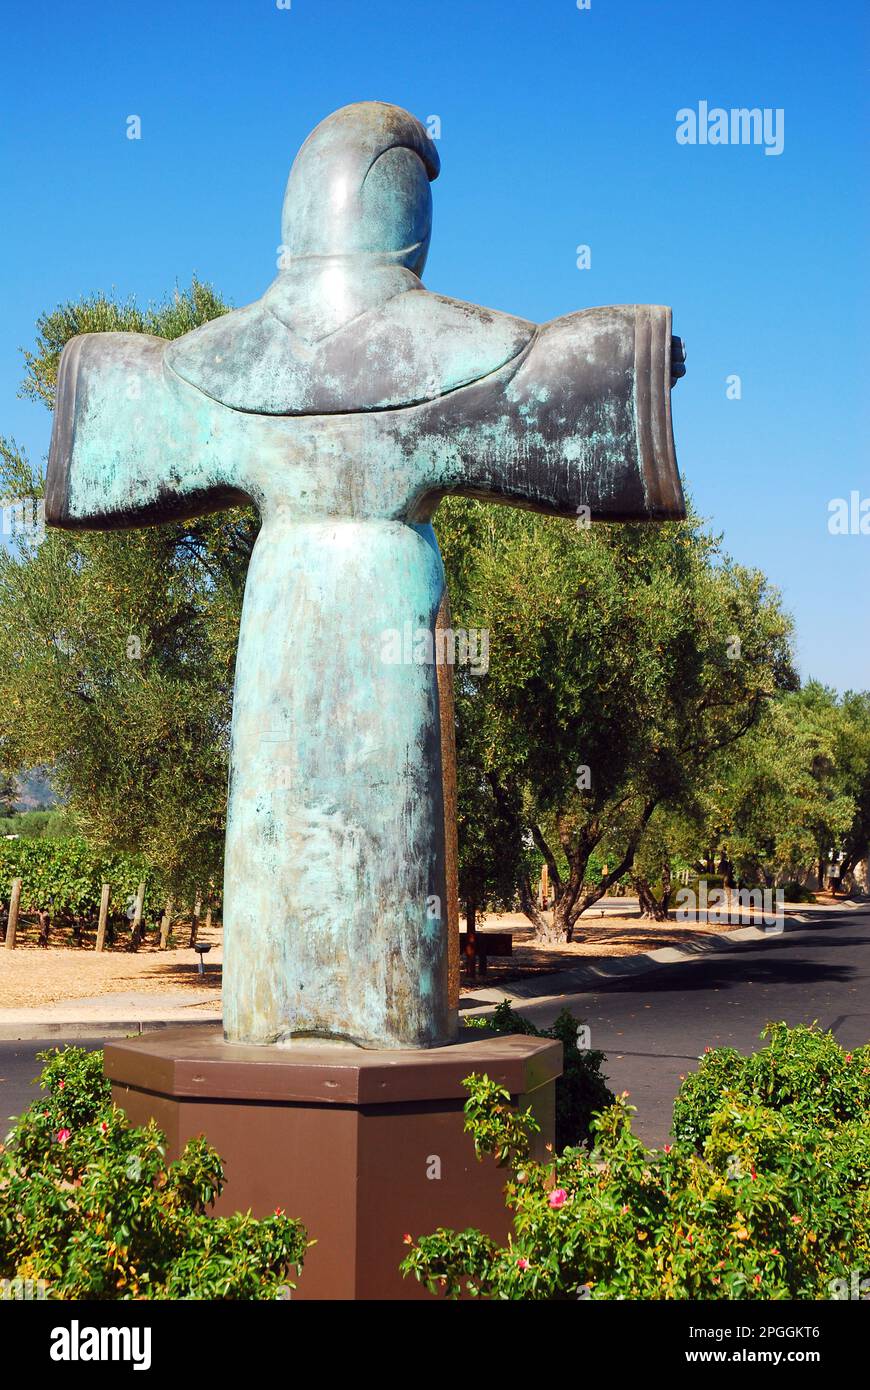 A sculpture of St Francis of Assisi with arms extended, welcomes visitors to the Robert Mondavi winery in the Napa Valley Stock Photo